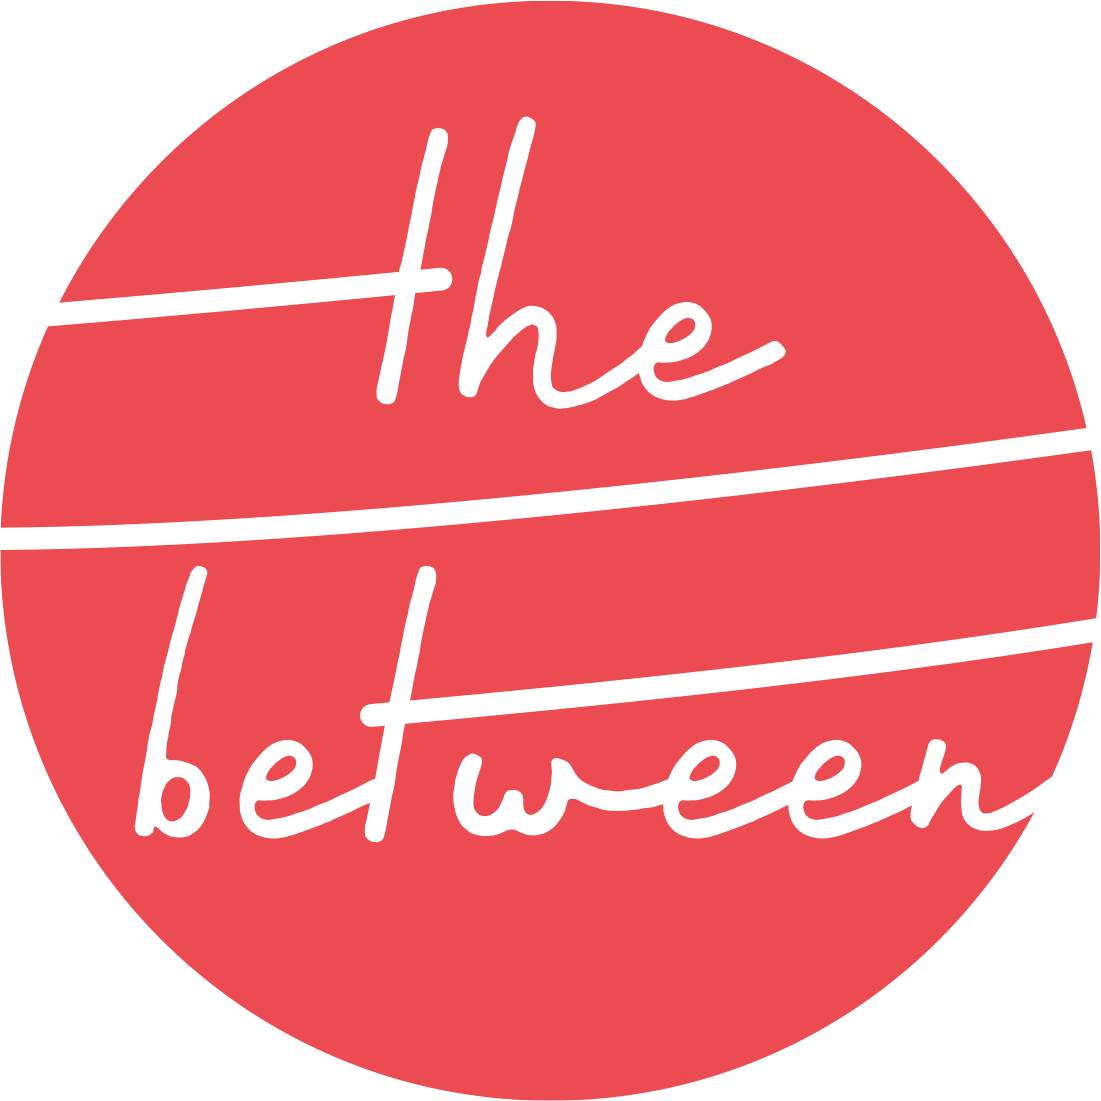 Artwork for The Line Between